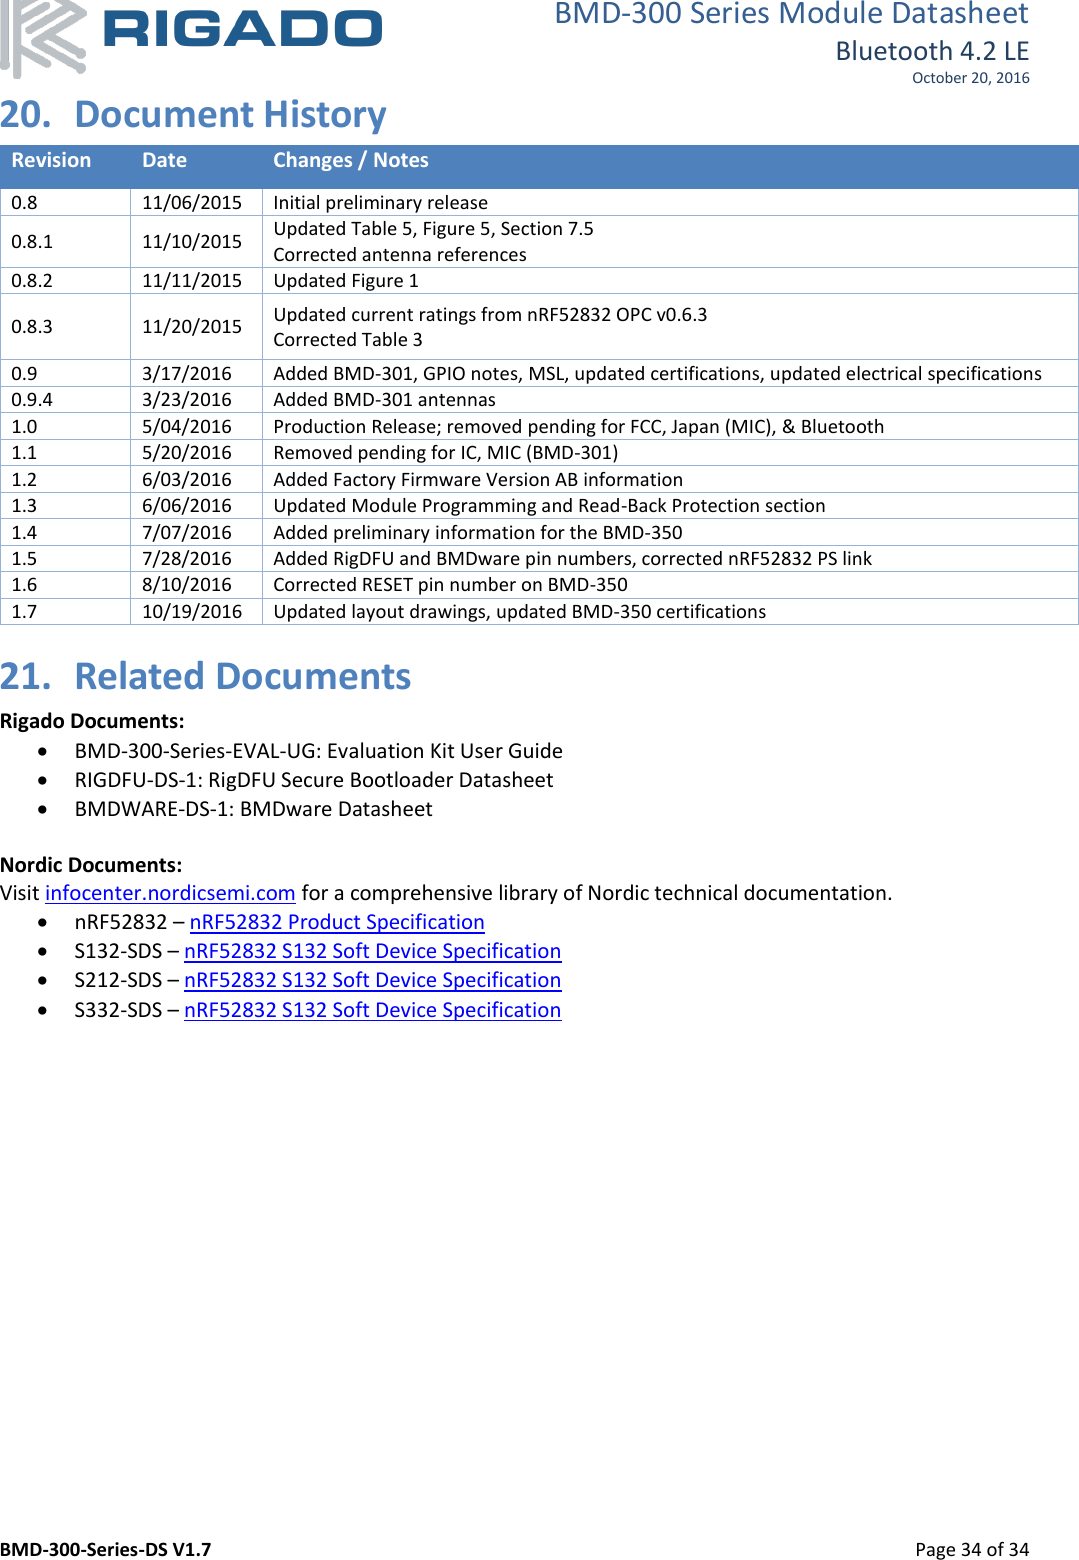 BMD-300 Series Module Datasheet Bluetooth 4.2 LE October 20, 2016 BMD-300-Series-DS V1.7         Page 34 of 34 20. Document History Revision Date Changes / Notes 0.8 11/06/2015 Initial preliminary release 0.8.1 11/10/2015 Updated Table 5, Figure 5, Section 7.5 Corrected antenna references 0.8.2 11/11/2015 Updated Figure 1 0.8.3 11/20/2015 Updated current ratings from nRF52832 OPC v0.6.3 Corrected Table 3 0.9 3/17/2016 Added BMD-301, GPIO notes, MSL, updated certifications, updated electrical specifications 0.9.4 3/23/2016 Added BMD-301 antennas 1.0 5/04/2016 Production Release; removed pending for FCC, Japan (MIC), &amp; Bluetooth 1.1 5/20/2016 Removed pending for IC, MIC (BMD-301) 1.2 6/03/2016 Added Factory Firmware Version AB information 1.3 6/06/2016 Updated Module Programming and Read-Back Protection section 1.4 7/07/2016 Added preliminary information for the BMD-350 1.5 7/28/2016 Added RigDFU and BMDware pin numbers, corrected nRF52832 PS link 1.6 8/10/2016 Corrected RESET pin number on BMD-350 1.7 10/19/2016 Updated layout drawings, updated BMD-350 certifications  21. Related Documents Rigado Documents:  BMD-300-Series-EVAL-UG: Evaluation Kit User Guide  RIGDFU-DS-1: RigDFU Secure Bootloader Datasheet  BMDWARE-DS-1: BMDware Datasheet  Nordic Documents:  Visit infocenter.nordicsemi.com for a comprehensive library of Nordic technical documentation.  nRF52832 – nRF52832 Product Specification  S132-SDS – nRF52832 S132 Soft Device Specification  S212-SDS – nRF52832 S132 Soft Device Specification  S332-SDS – nRF52832 S132 Soft Device Specification  